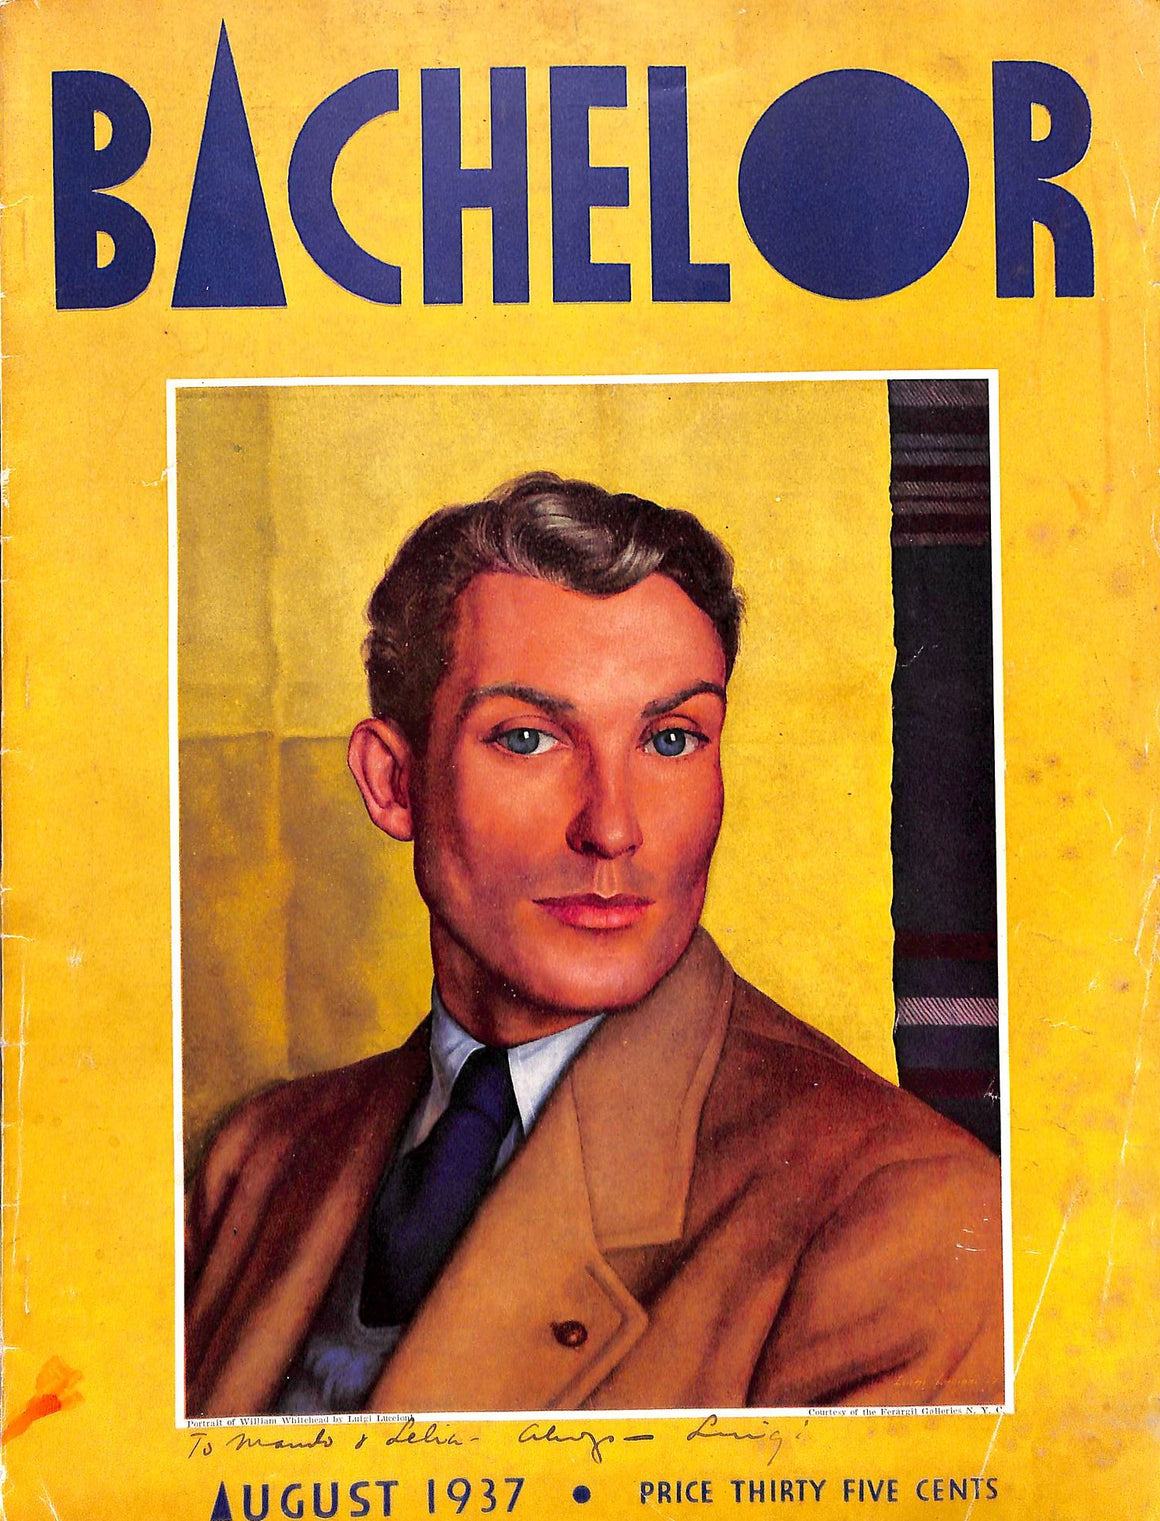 "Bachelor Magazine" August 1937 (SOLD)